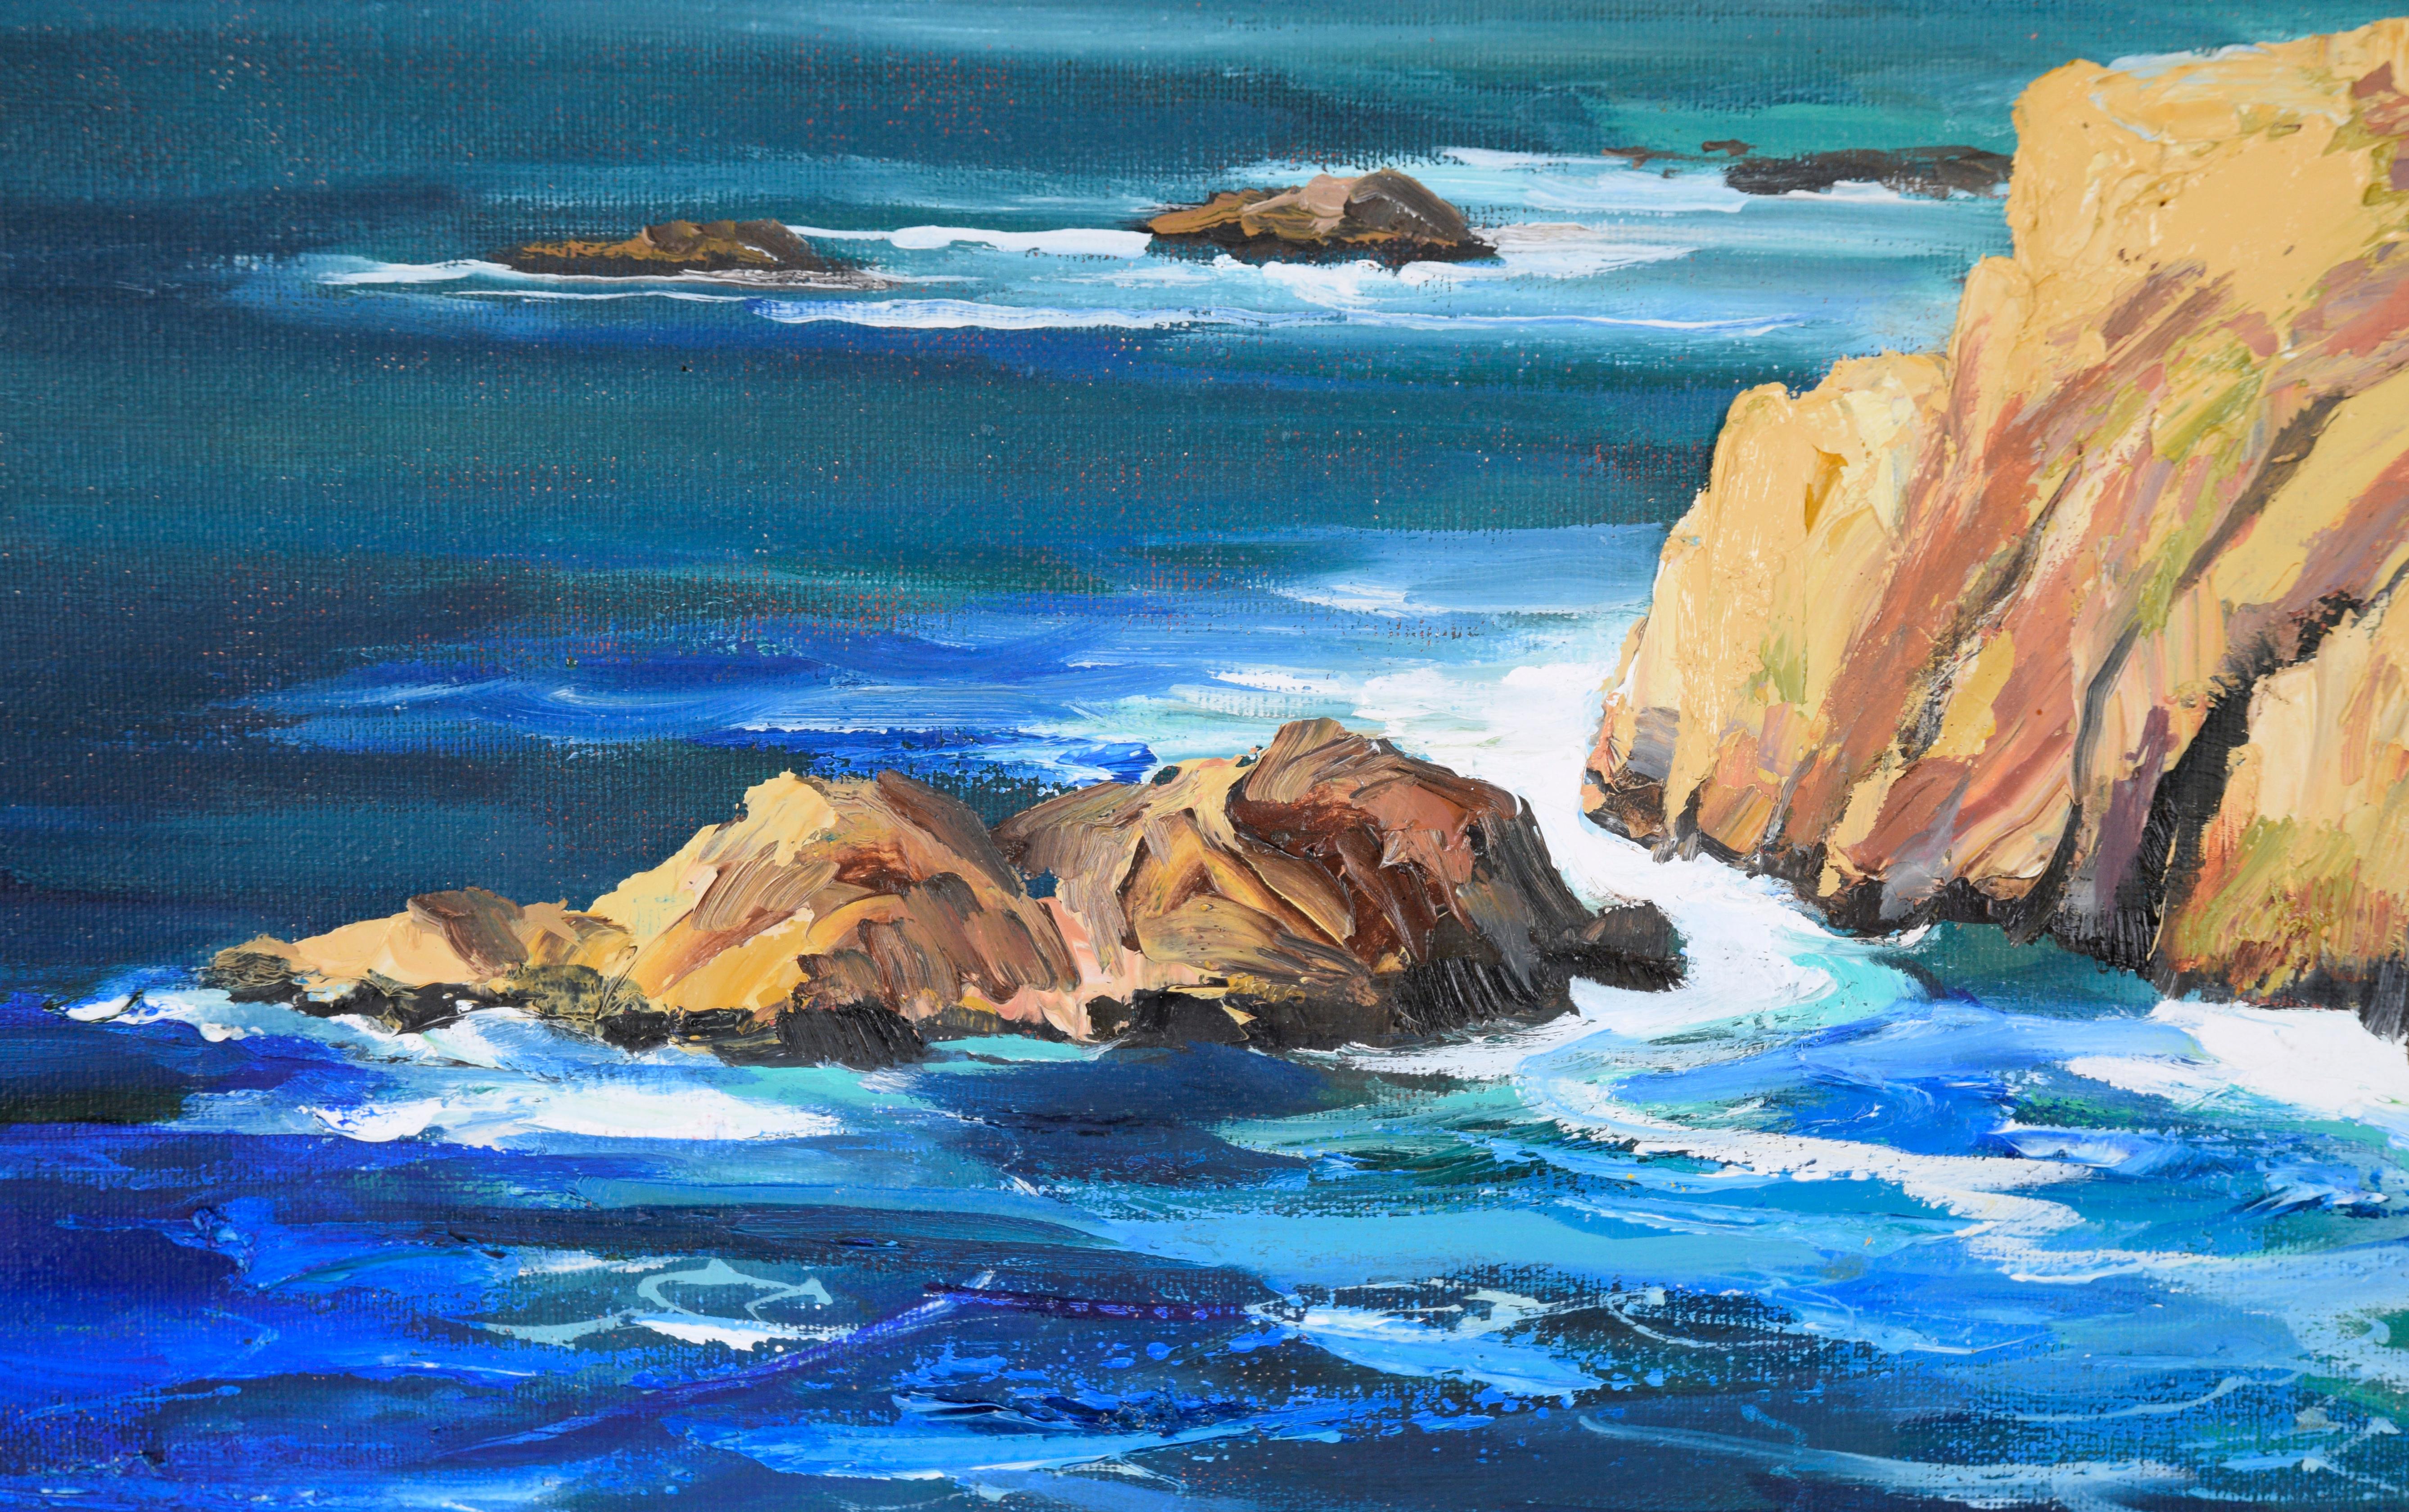 Coastal Cliffs and Rocks - Hurricane Point - Big Sur Seascape in Oil on Canvas

Gorgeous seascape of Big Sur coast by California artist Kathleen Murray (American, b. 1958). The brilliant blue Pacific crashes up against steep coastal cliffs. There